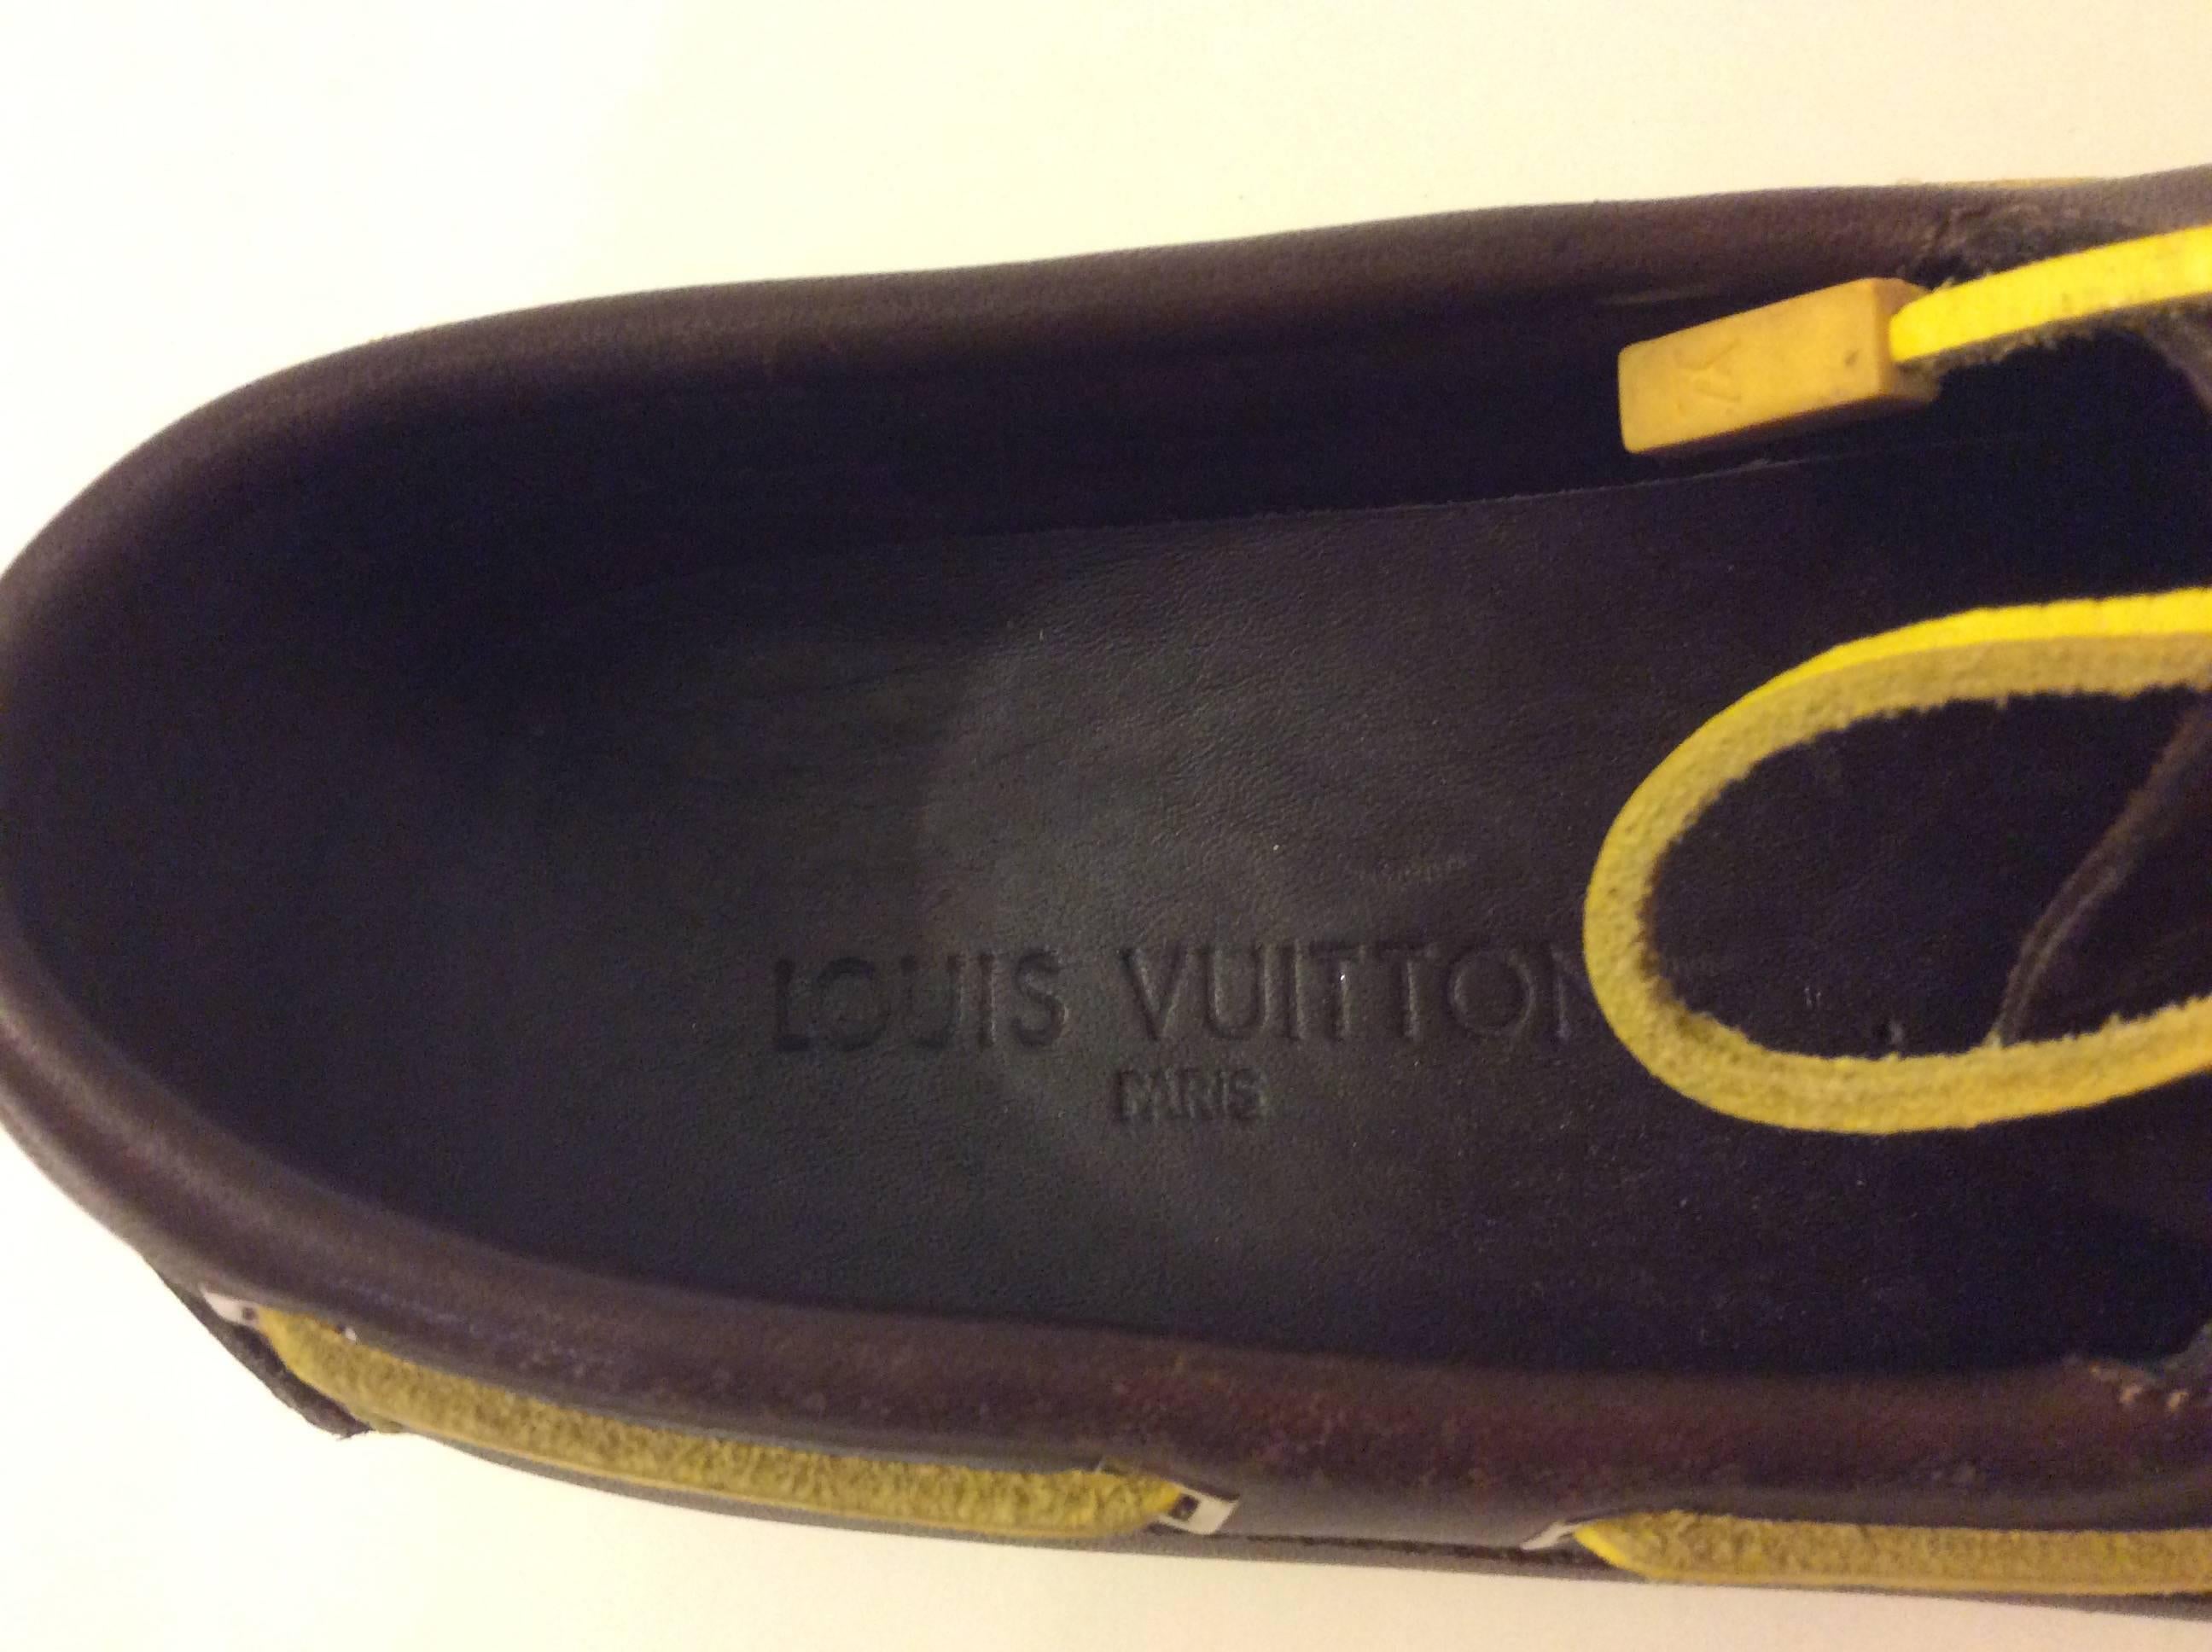 This pair of Louis Vuitton Docksiders were a special release for the Louis Vuitton Cup. They are a size 37.5 and are a chocolate brown with yellow laces. They have been worn for a fittings, but are in near mint condition. The shoes are 10 inches